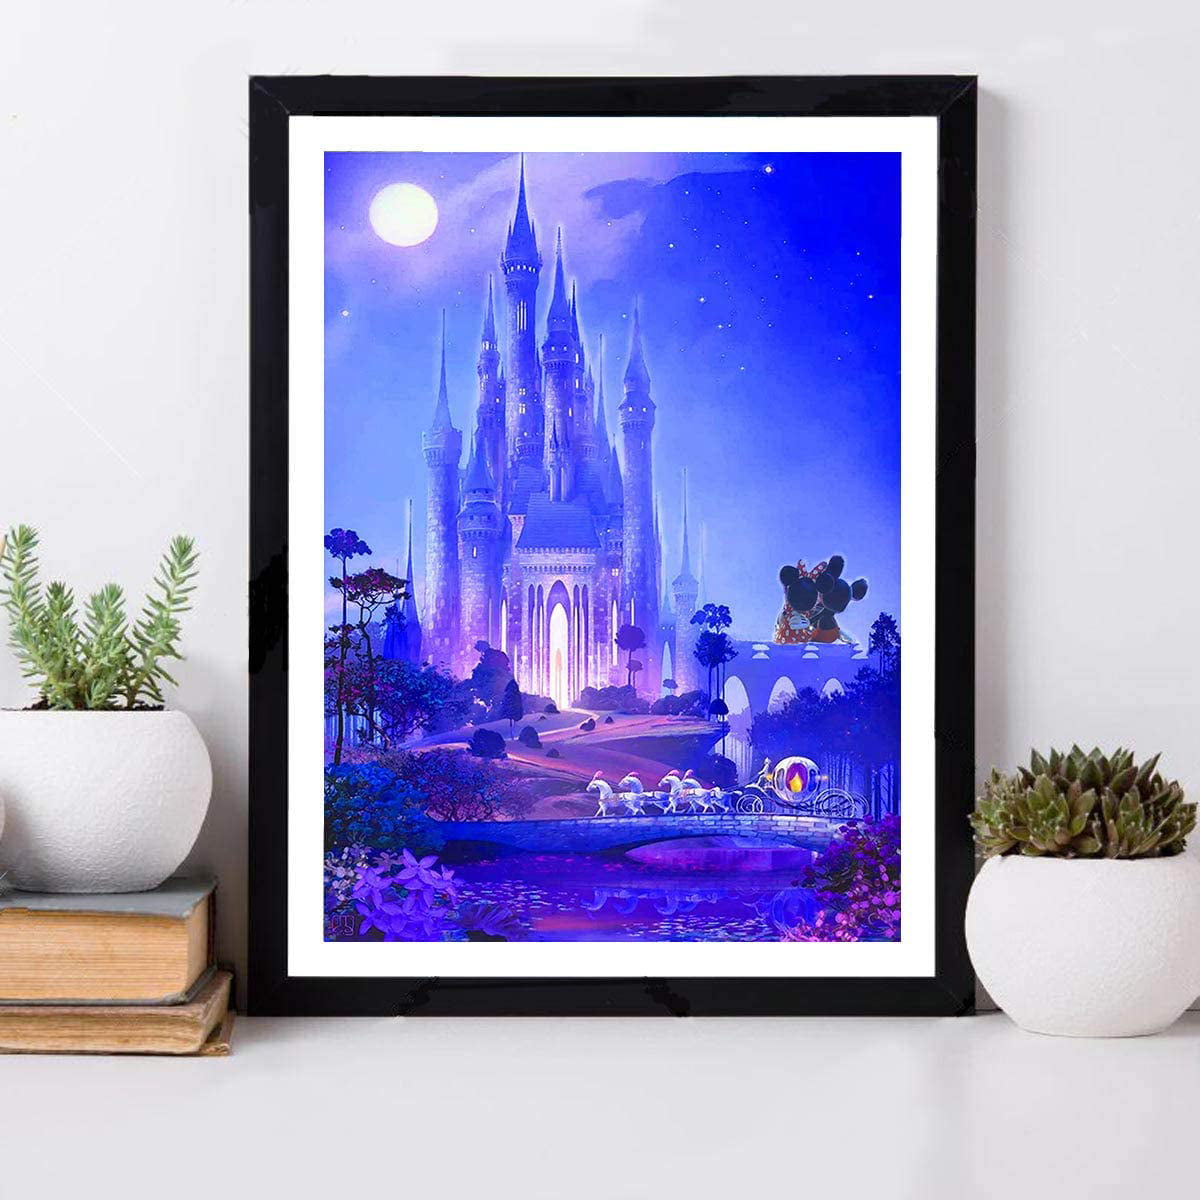 DIY 5D Diamond Painting Kits Full Drill Diamond Painting for Adults and Kids,Round Diamond Art Perfect for Relaxation and Home Wall Decor Gift（Castle,12x16inch）